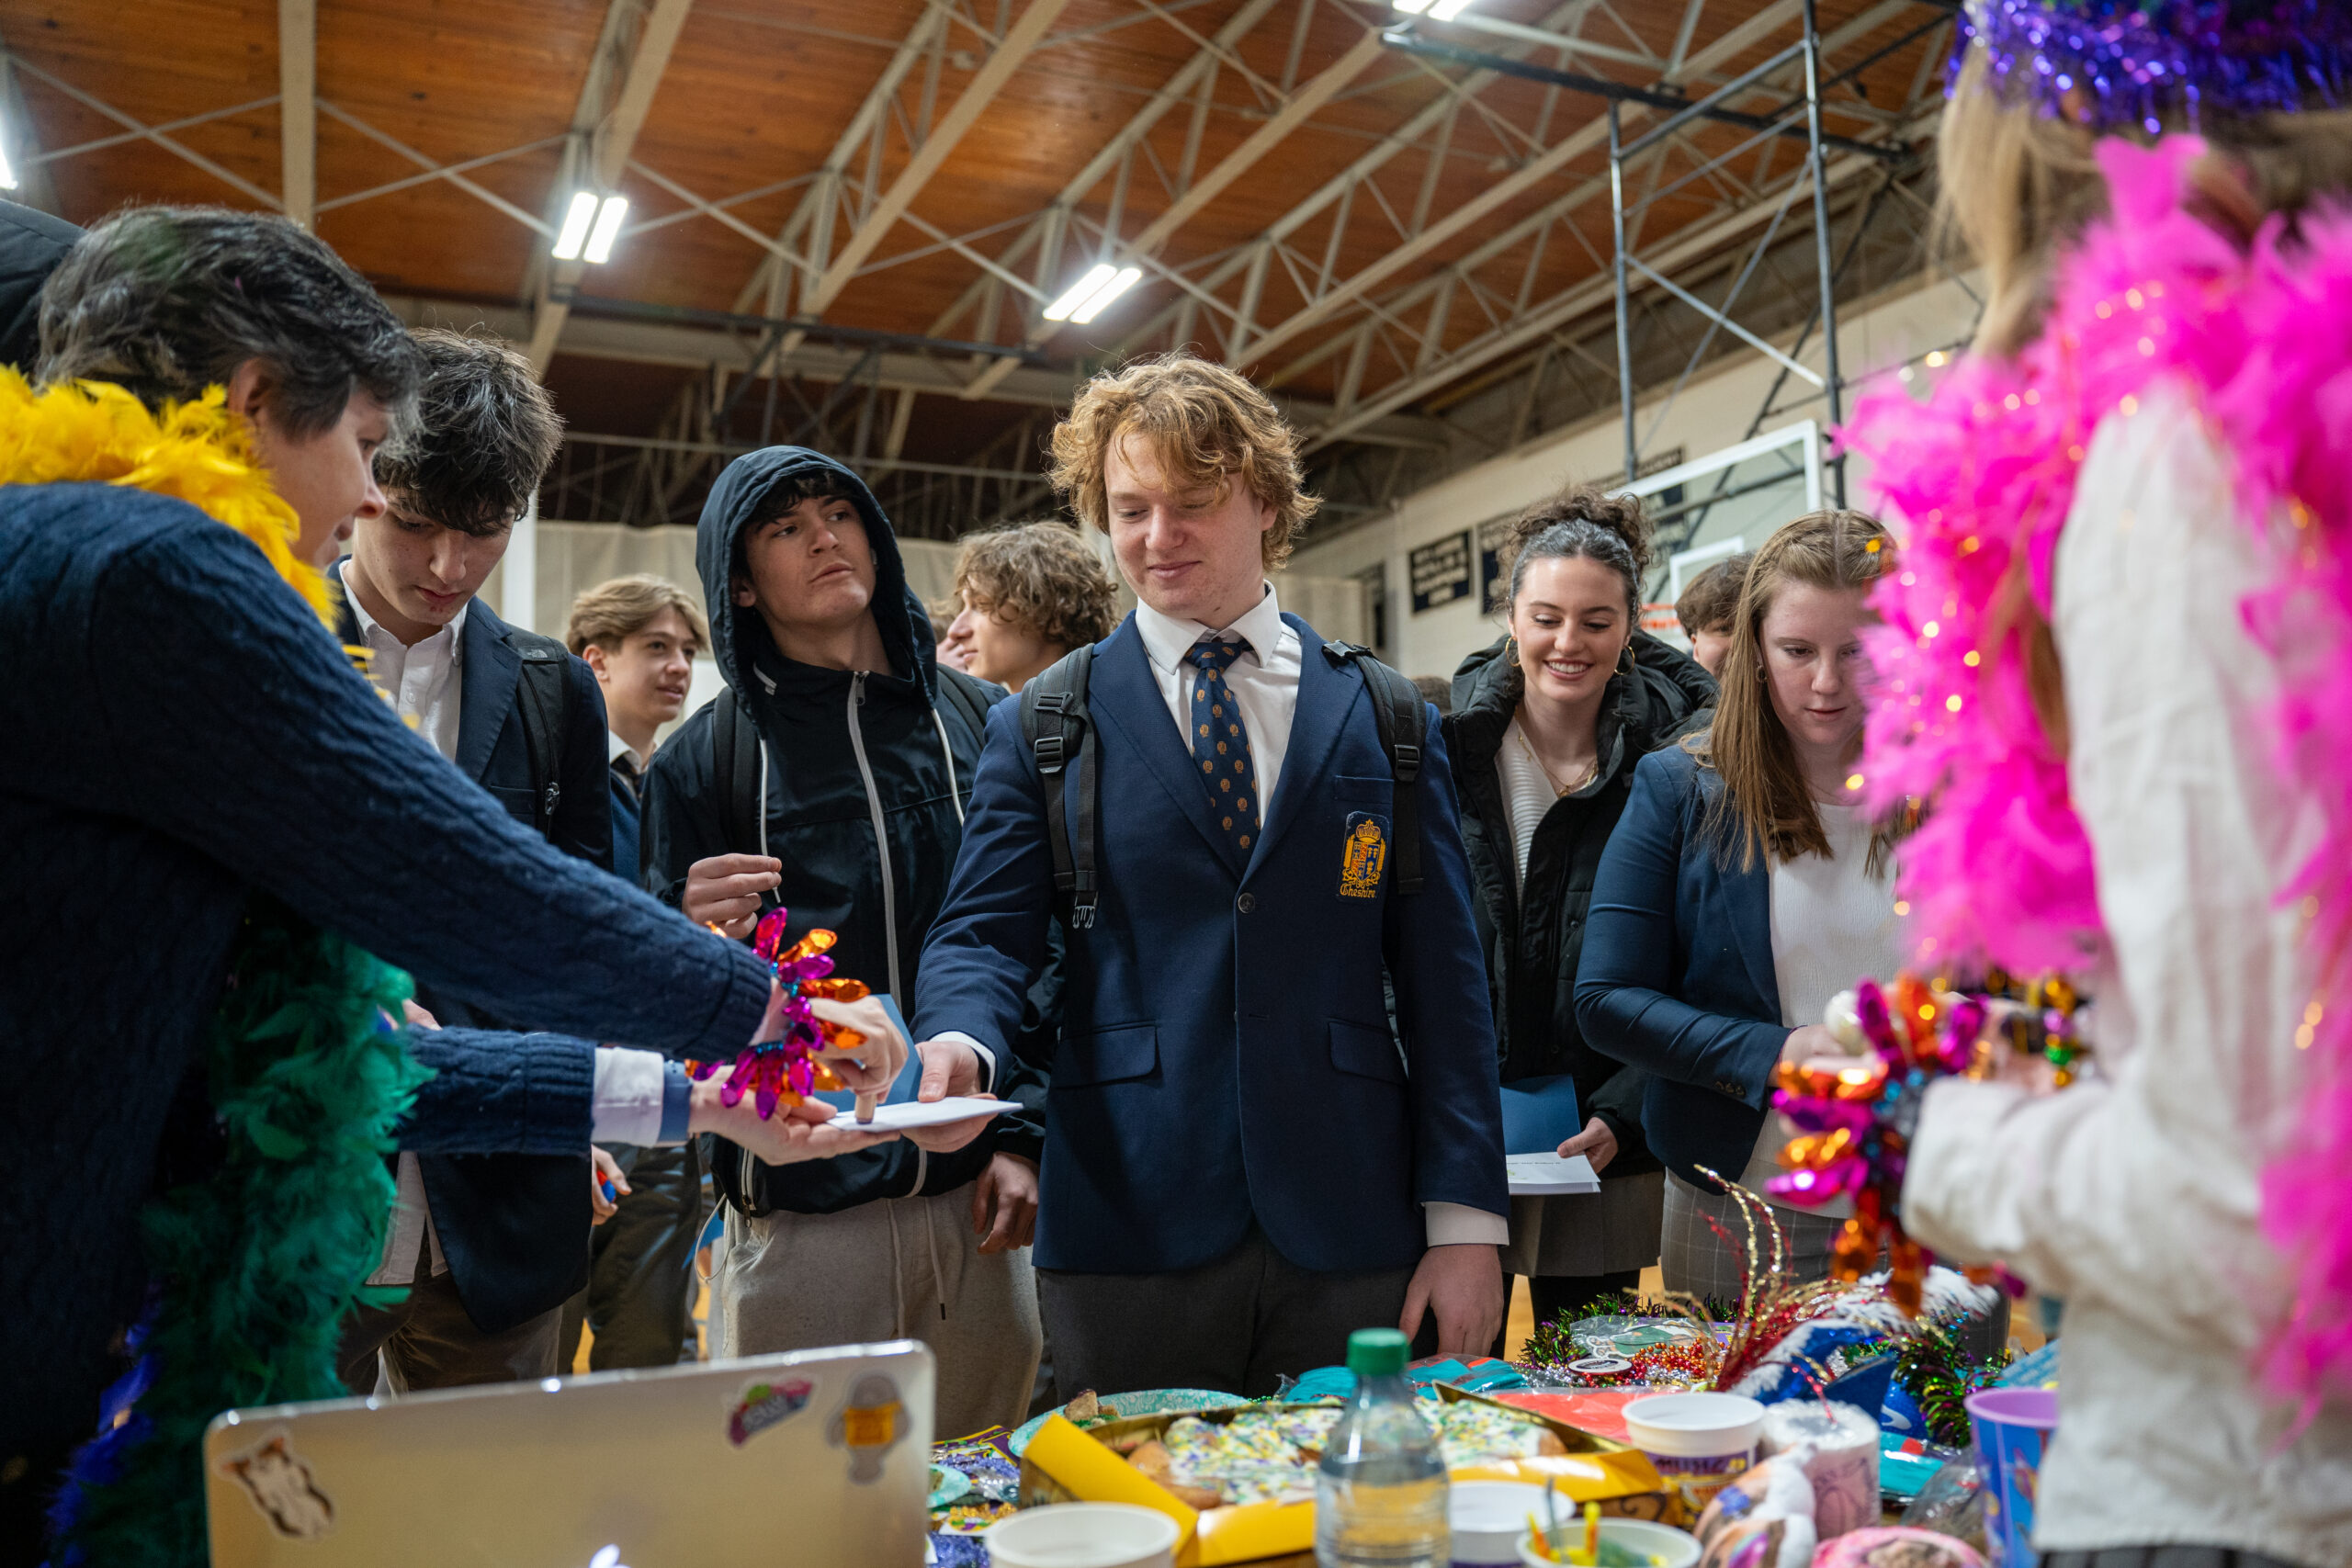 Cheshire Academy students standing around table with cultural items